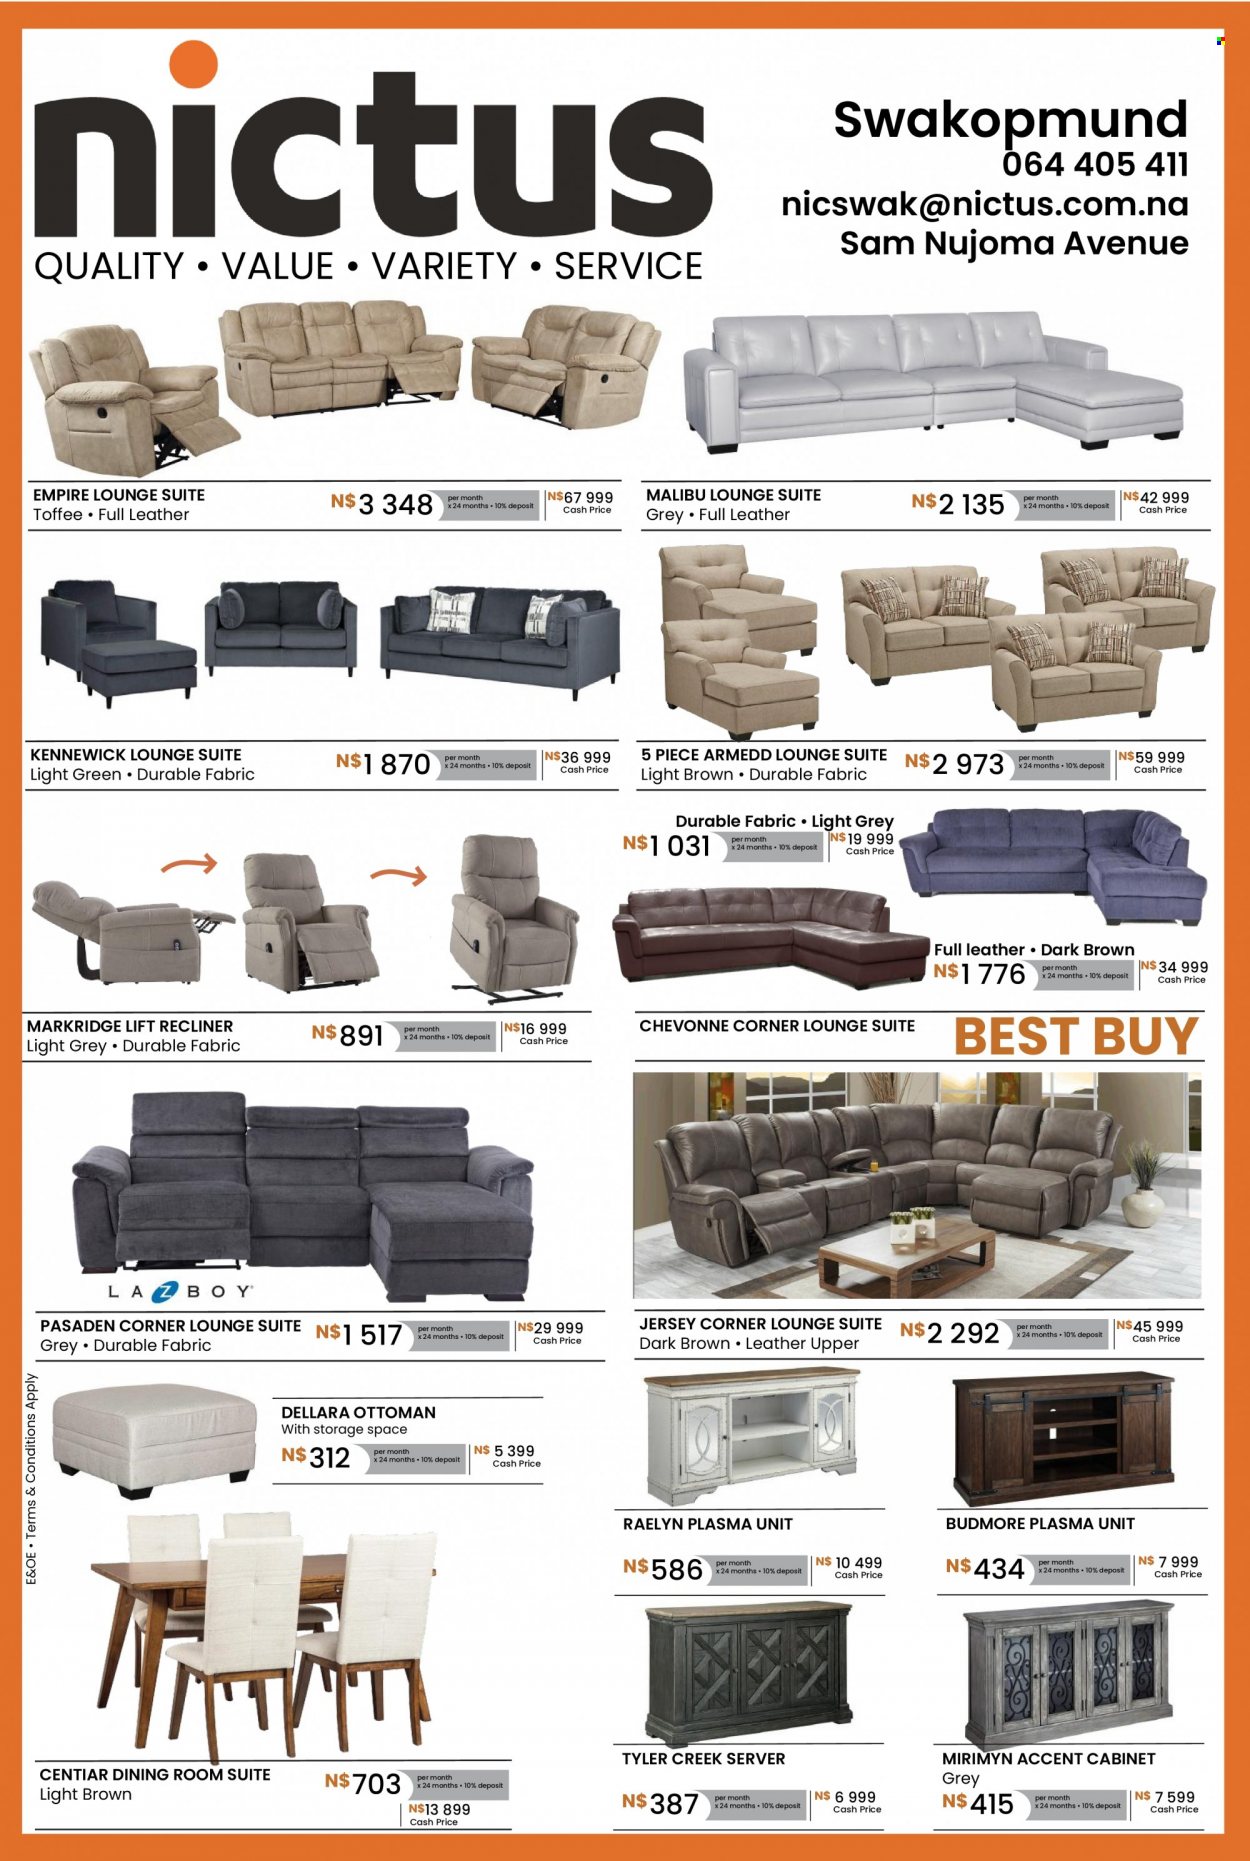 thumbnail - Nictus catalogue  - Sales products - cabinet, dining room suite, recliner chair, lounge suite, lounge, ottoman. Page 1.